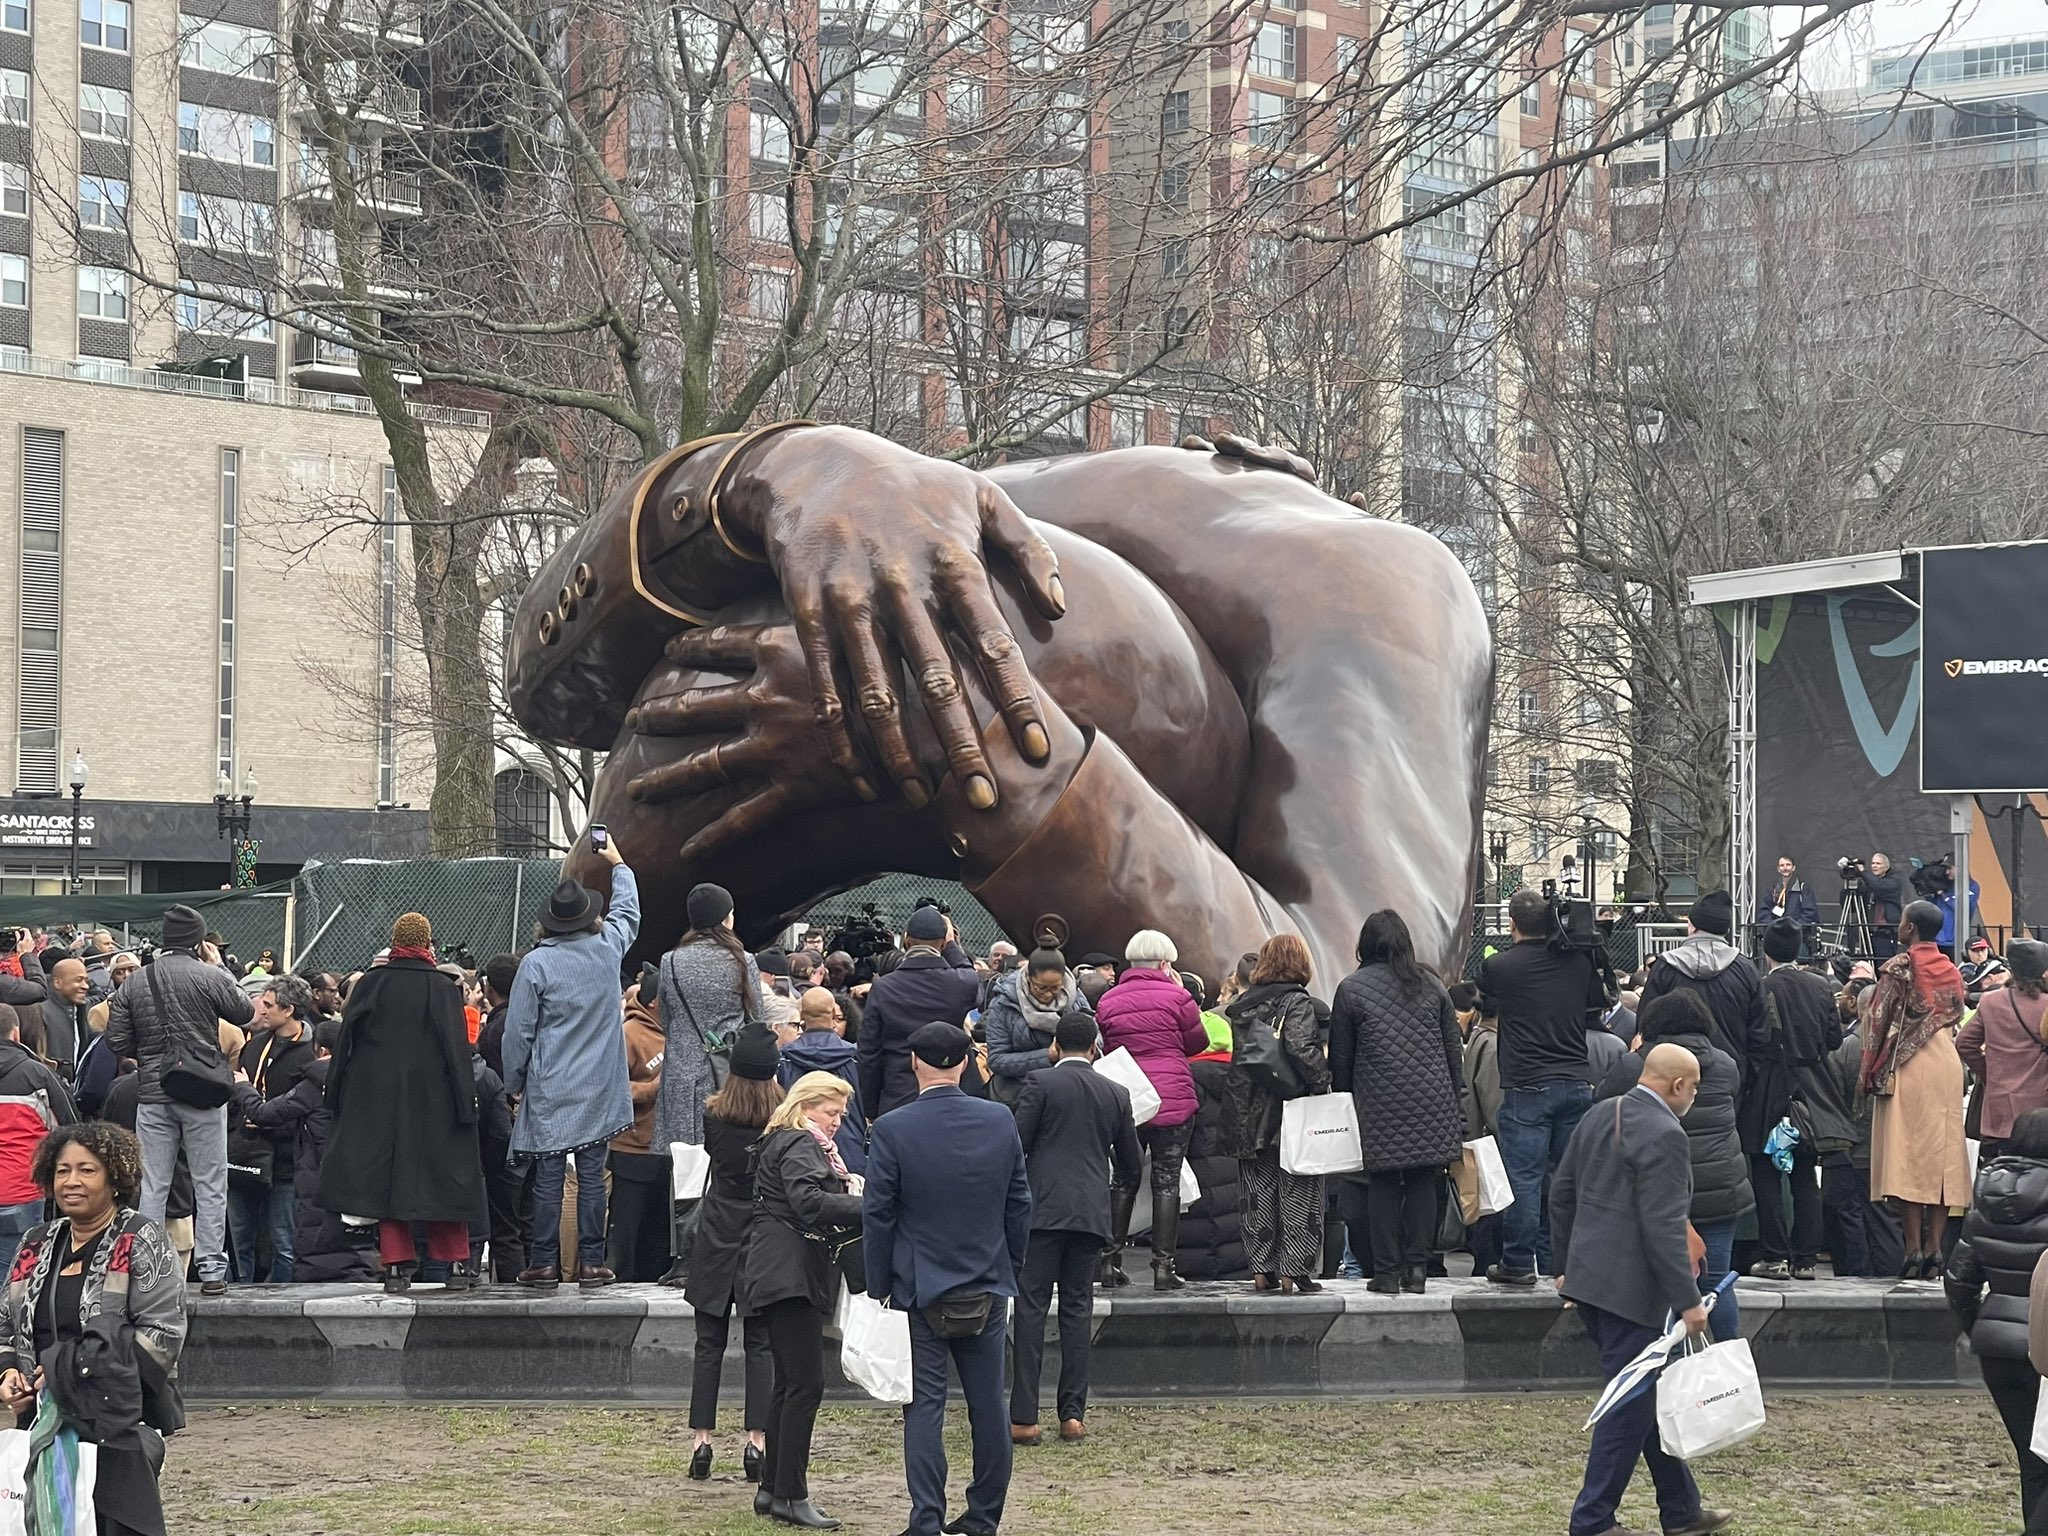 ‘Love 360': The Embrace, Boston's New Monument to MLK, Coretta Scott King, Is Unveiled